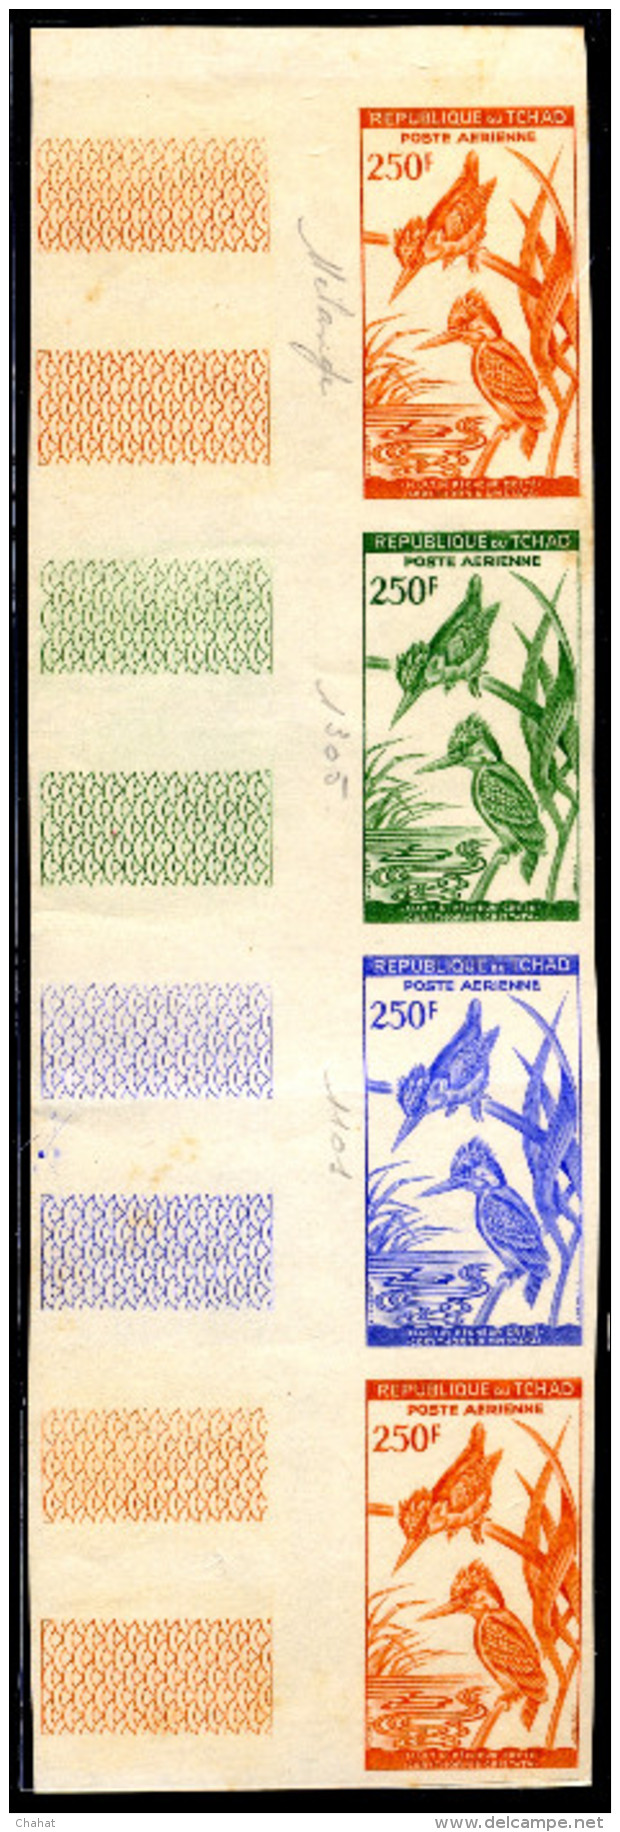 BIRDS-MALACHITE KINGFISHER-IMPERF COLOR TRIALS-STRIP OF 4 WITH JEWELS ON MARGINS-CHAD-1963-SCARCE-D2-11 - Piciformes (pájaros Carpinteros)